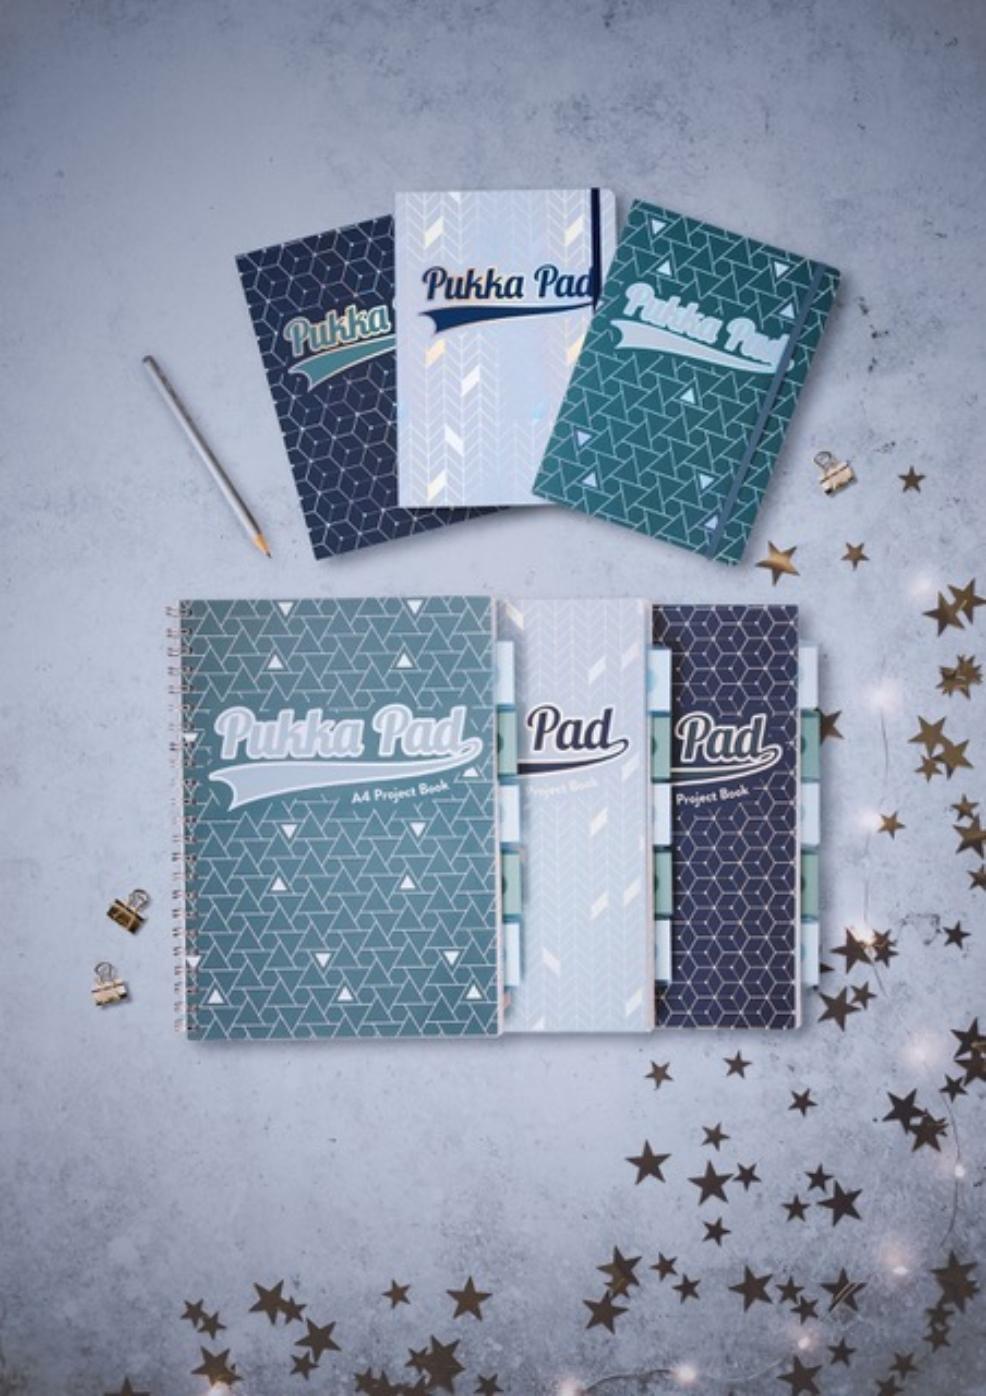 picture of pukka pads stationary products